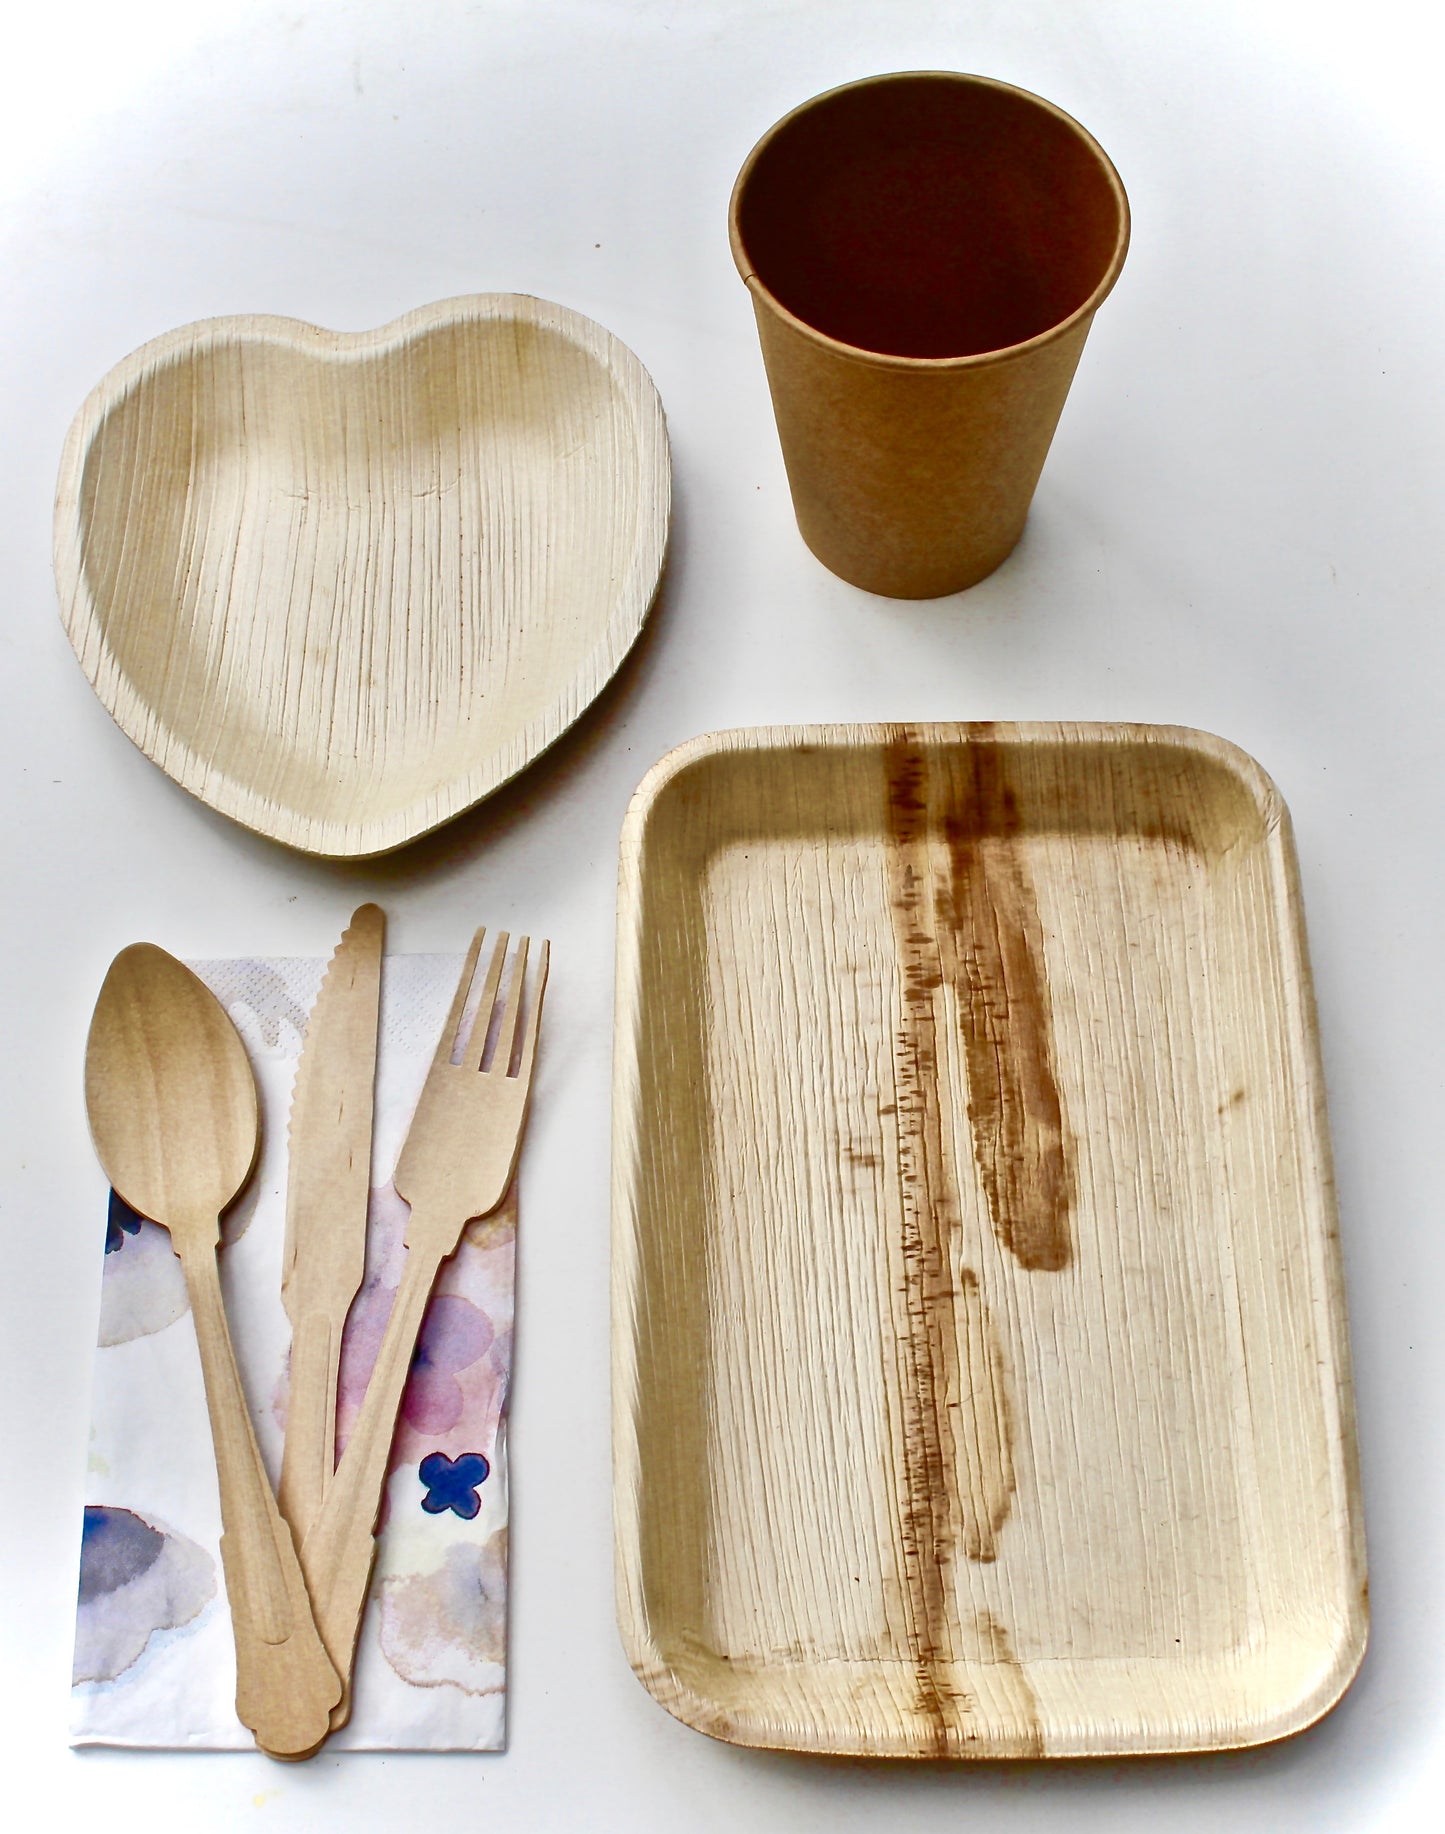 Palm Leaf plates 10 Pice 6x4" Try angle - 10 pic 6" Heart  - 10 pic Coup  - 30 Pic cutlery  - 20 pic napkin